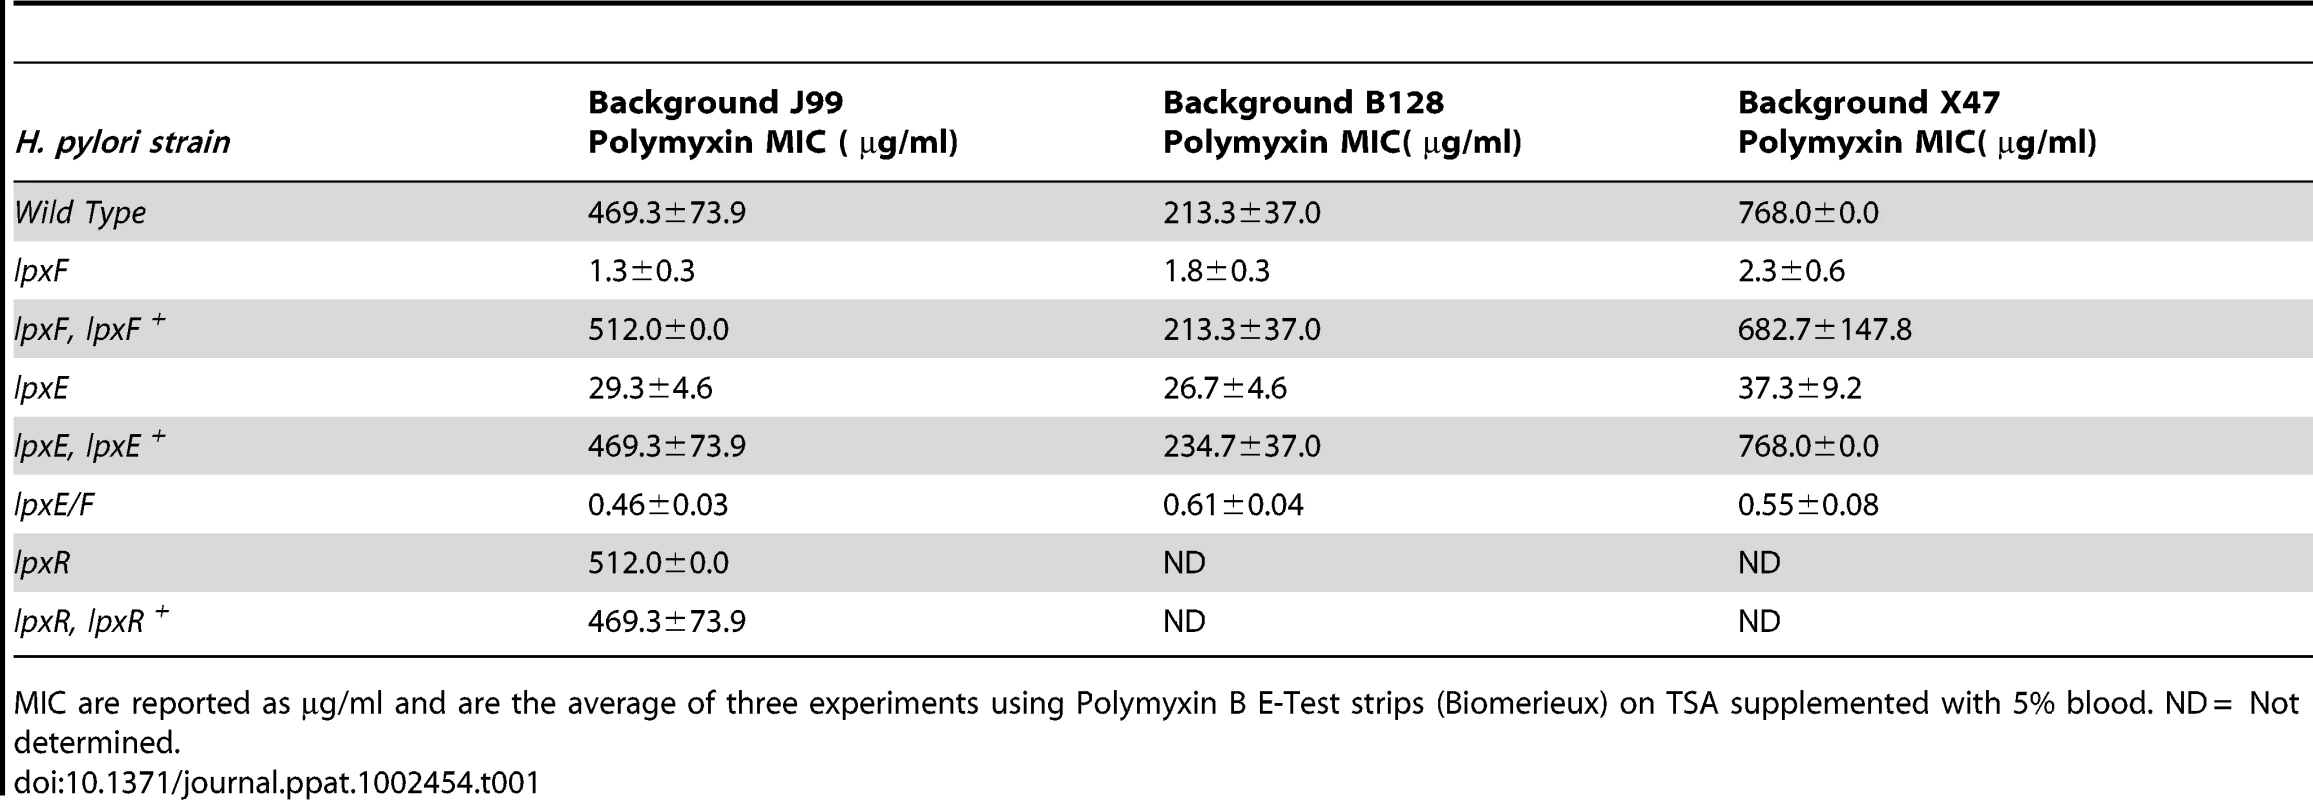 Minimal Inhibitory Concentrations (MIC) of polymyxin against <i>H. pylori</i> strains.